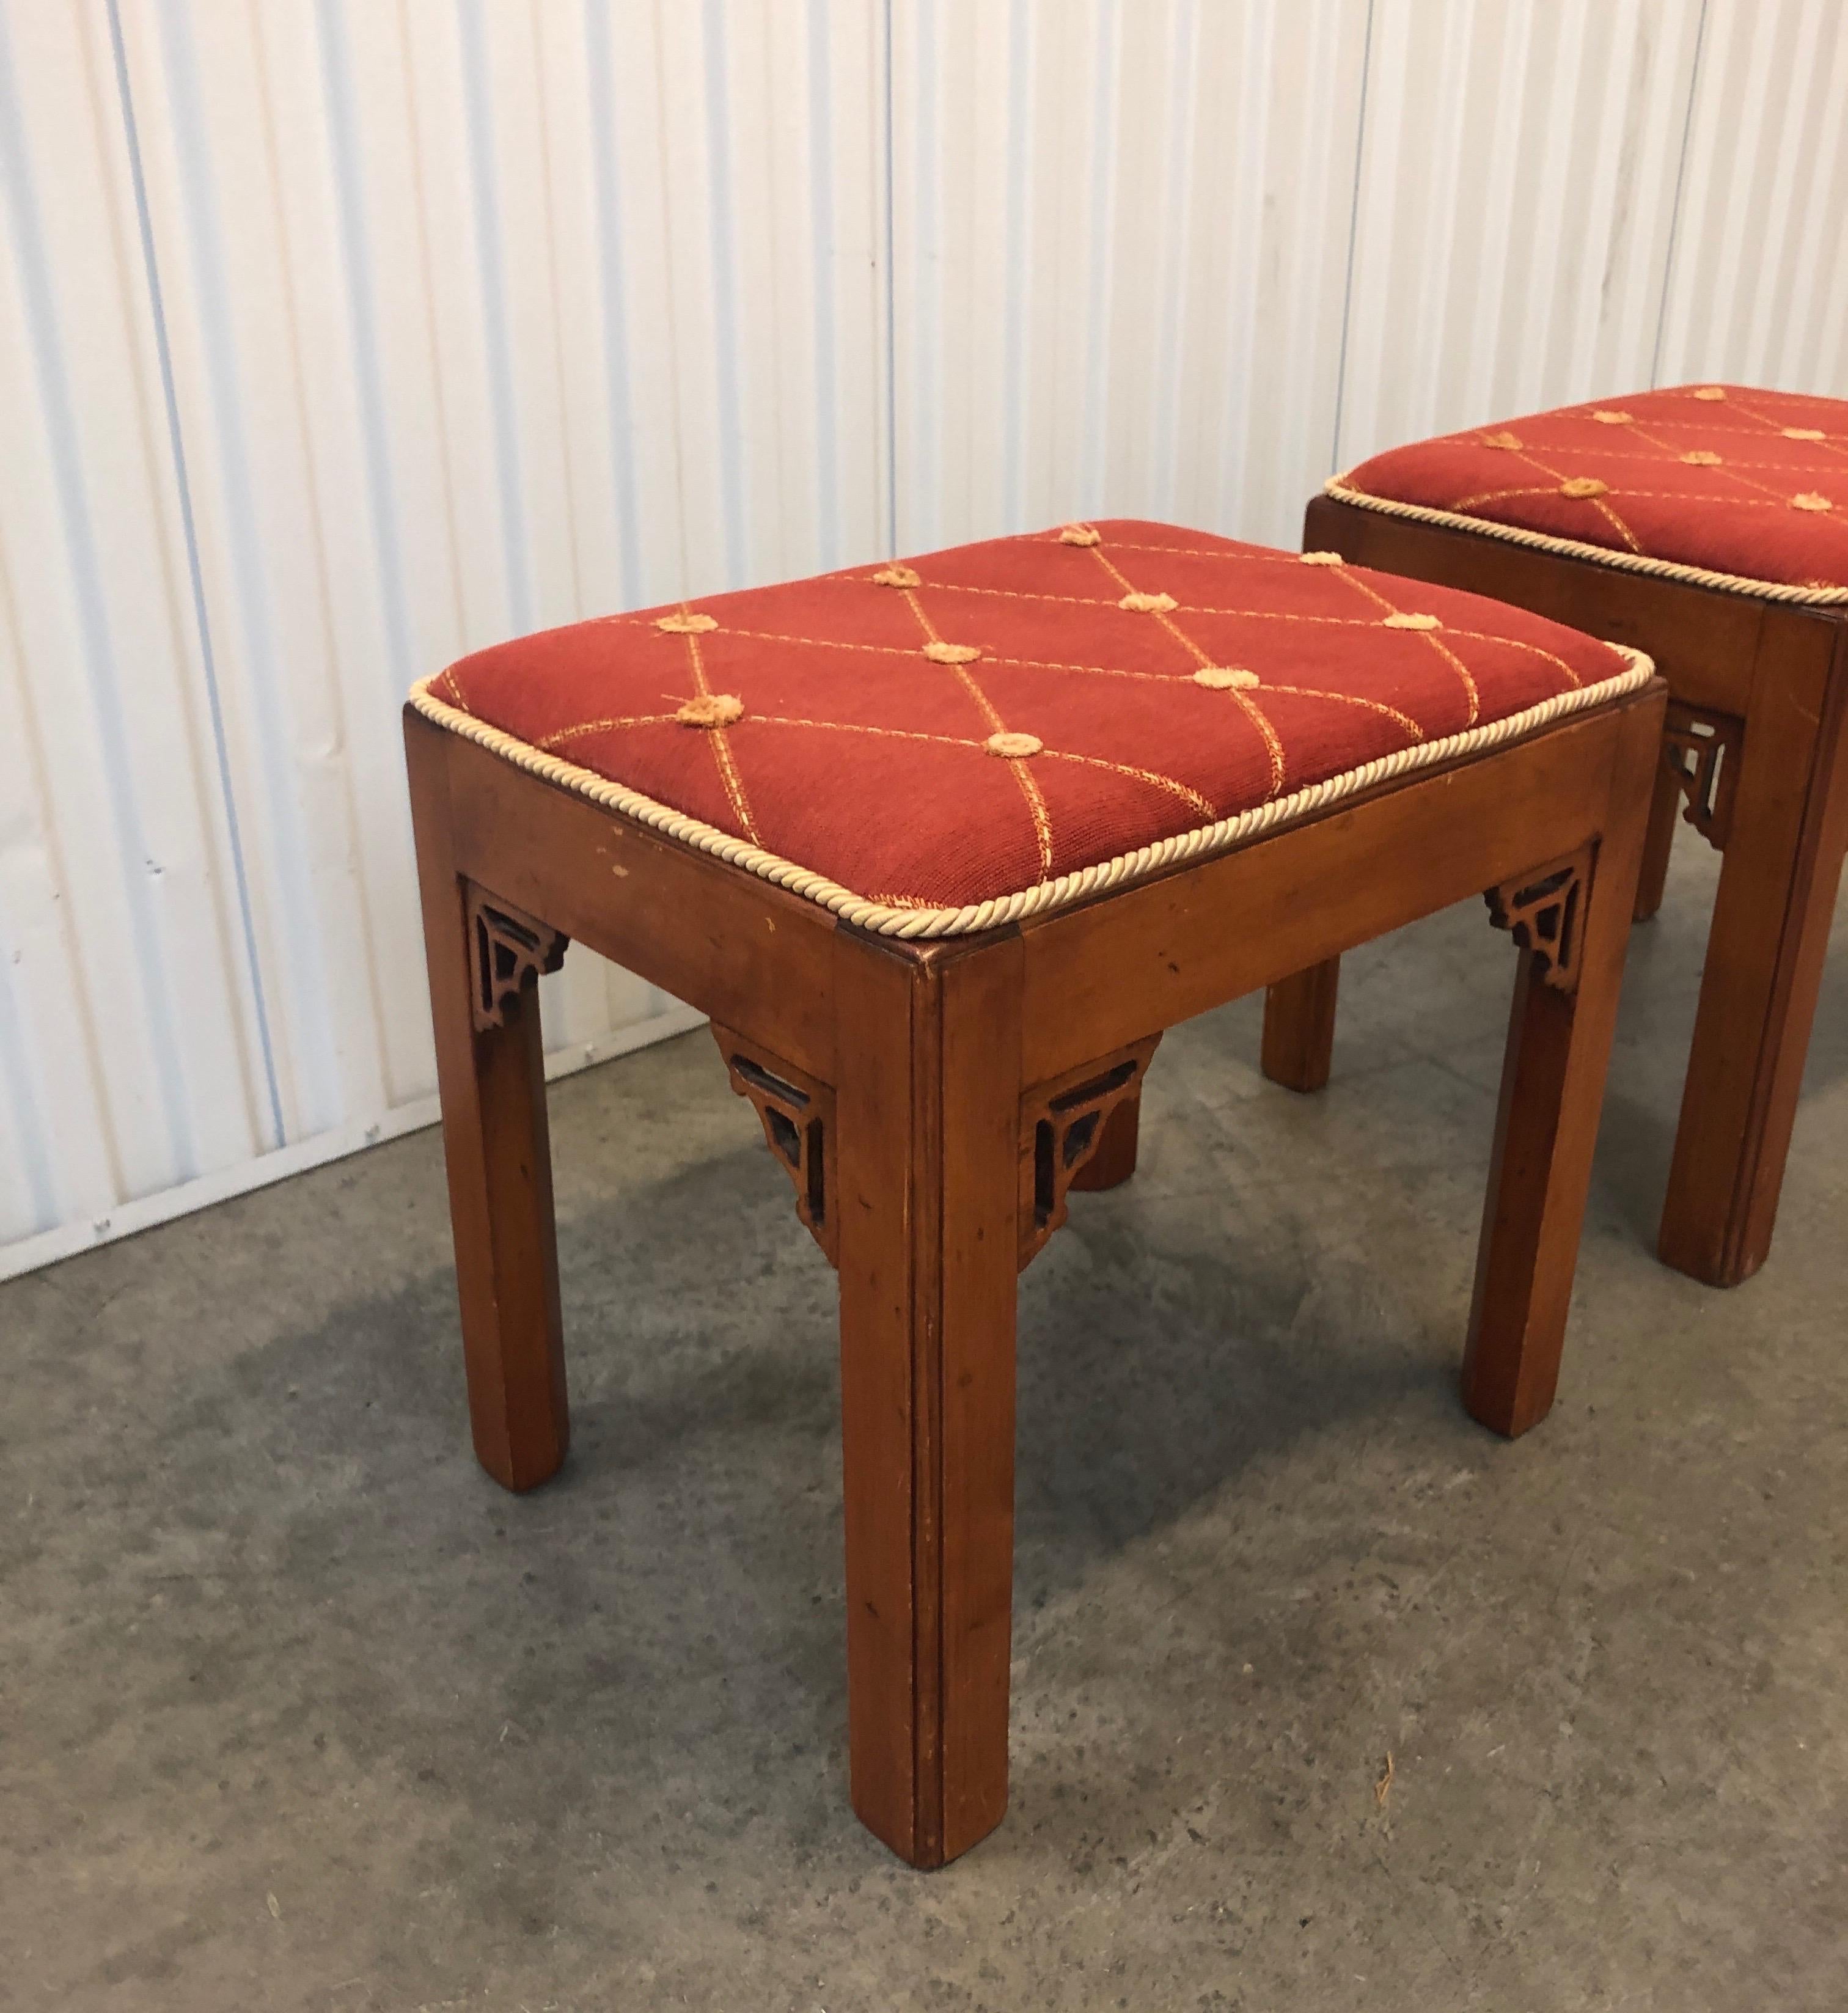 Pair of vintage rectangular fretwork upholstered benches
with newly burnt orange upholstery and trim.
Size: 18.5” W x 14.5” D x 17” H.